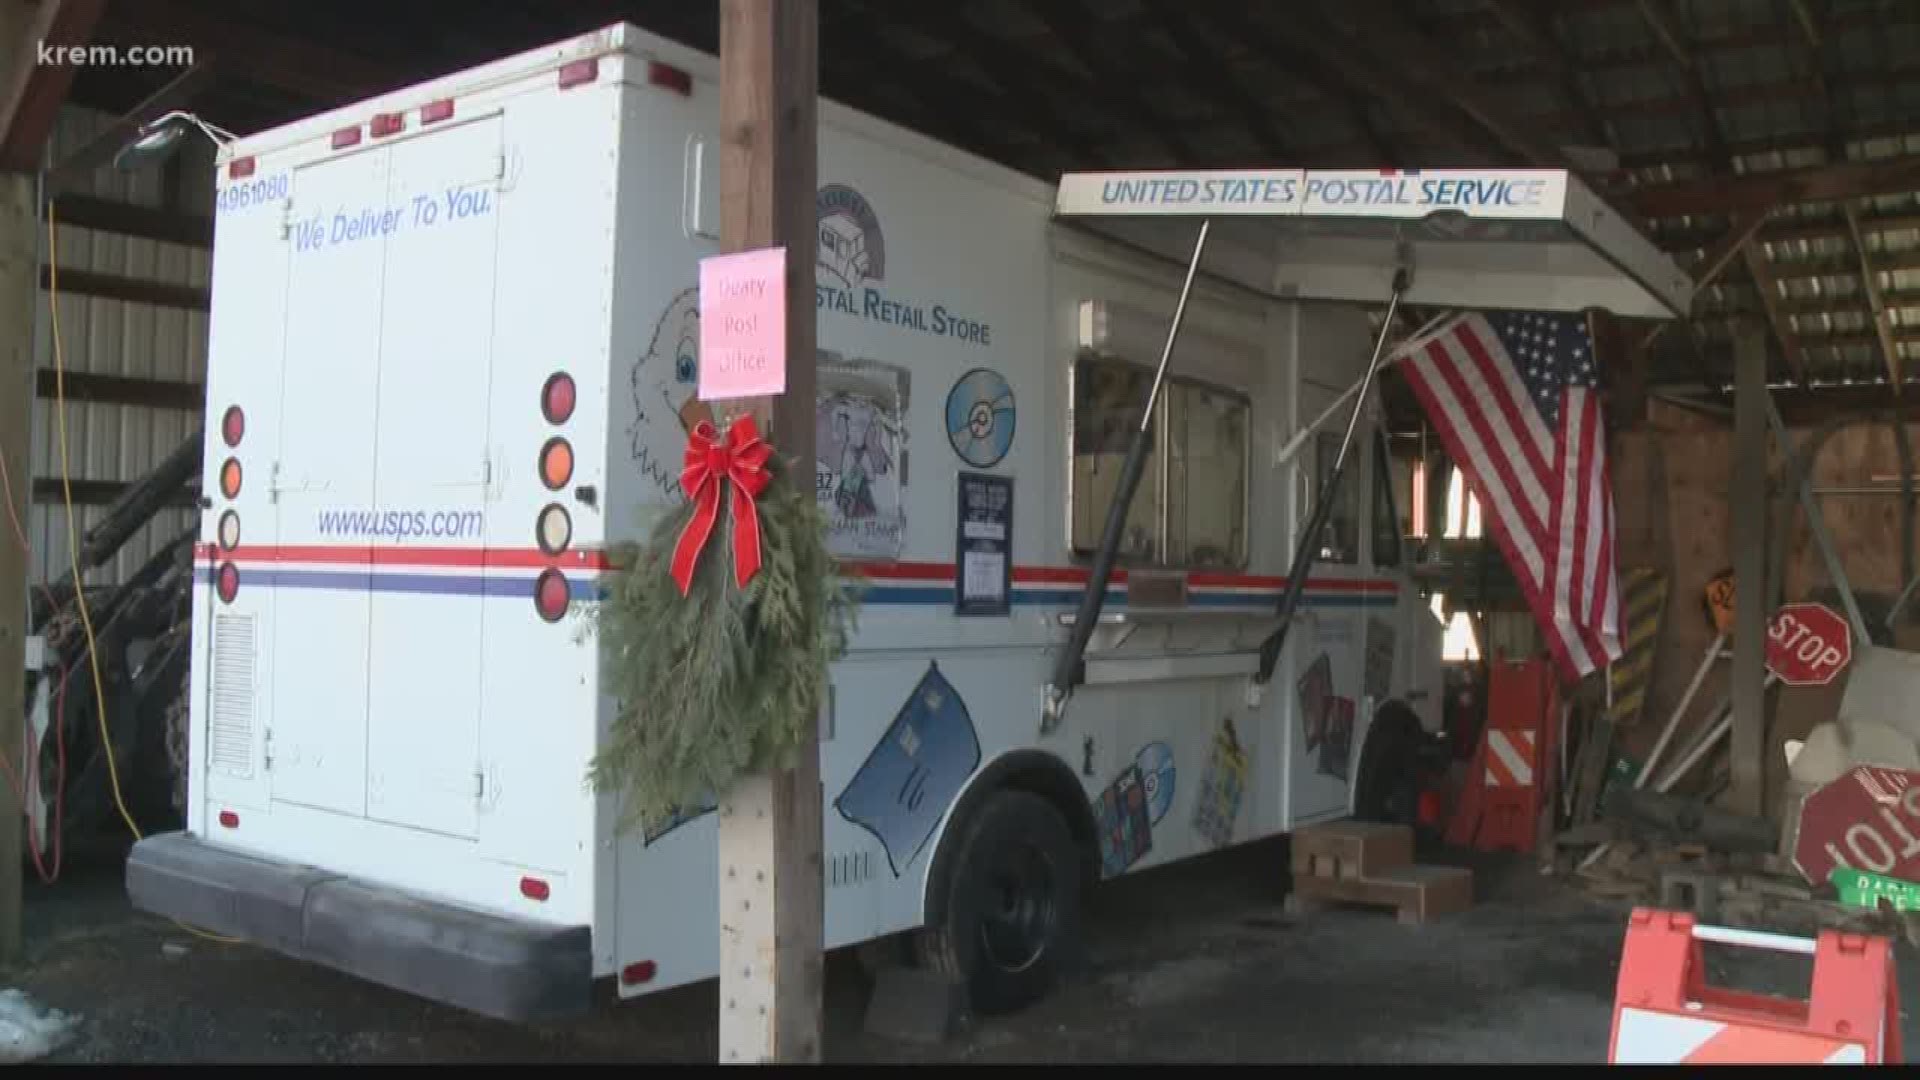 Since last June, USPS has been conducting operations out of a specialty van parked in the Latah County city of roughly 500 people.